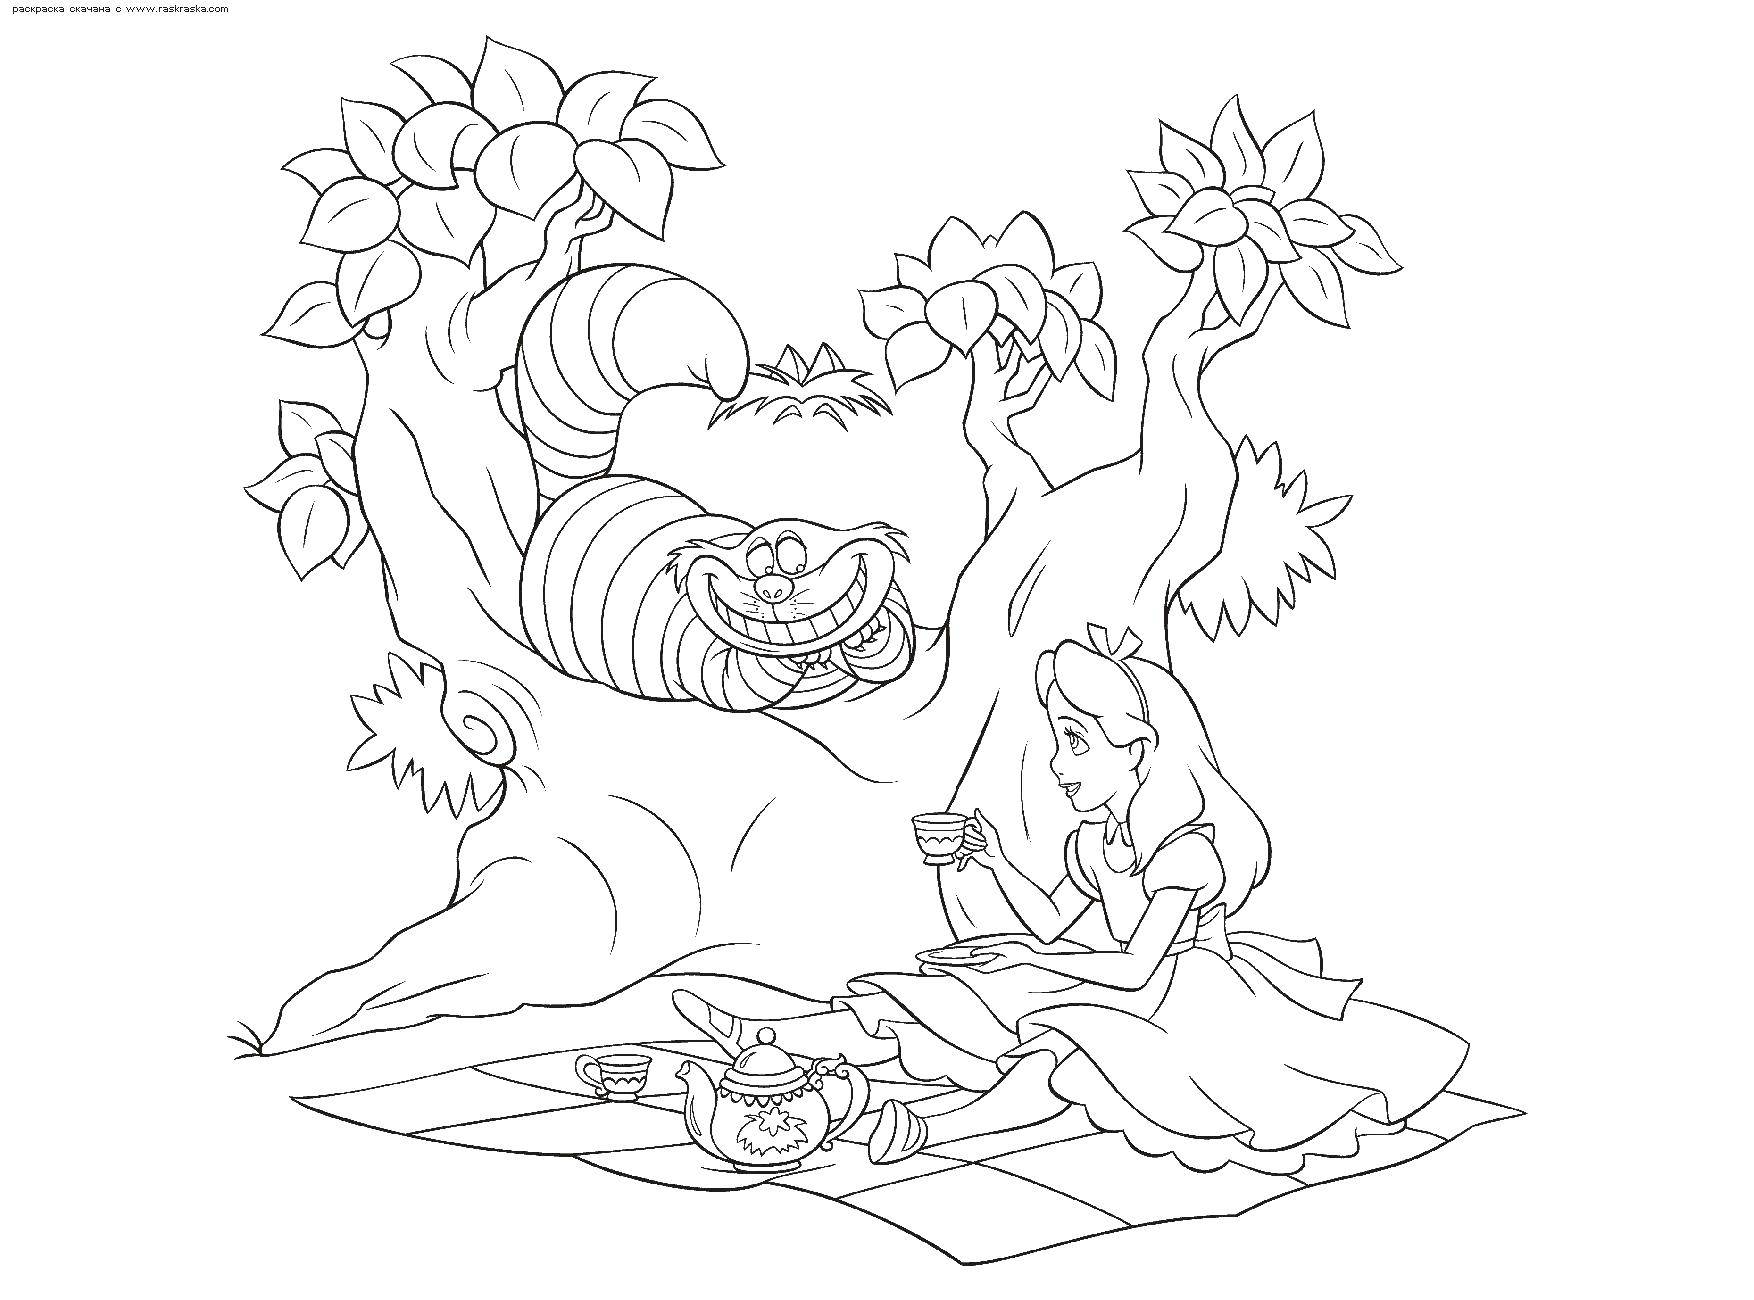 Coloring Alice and the Cheshire cat at the picnic. Category coloring. Tags:  Alice , Wonderland, Cheshire Cat.